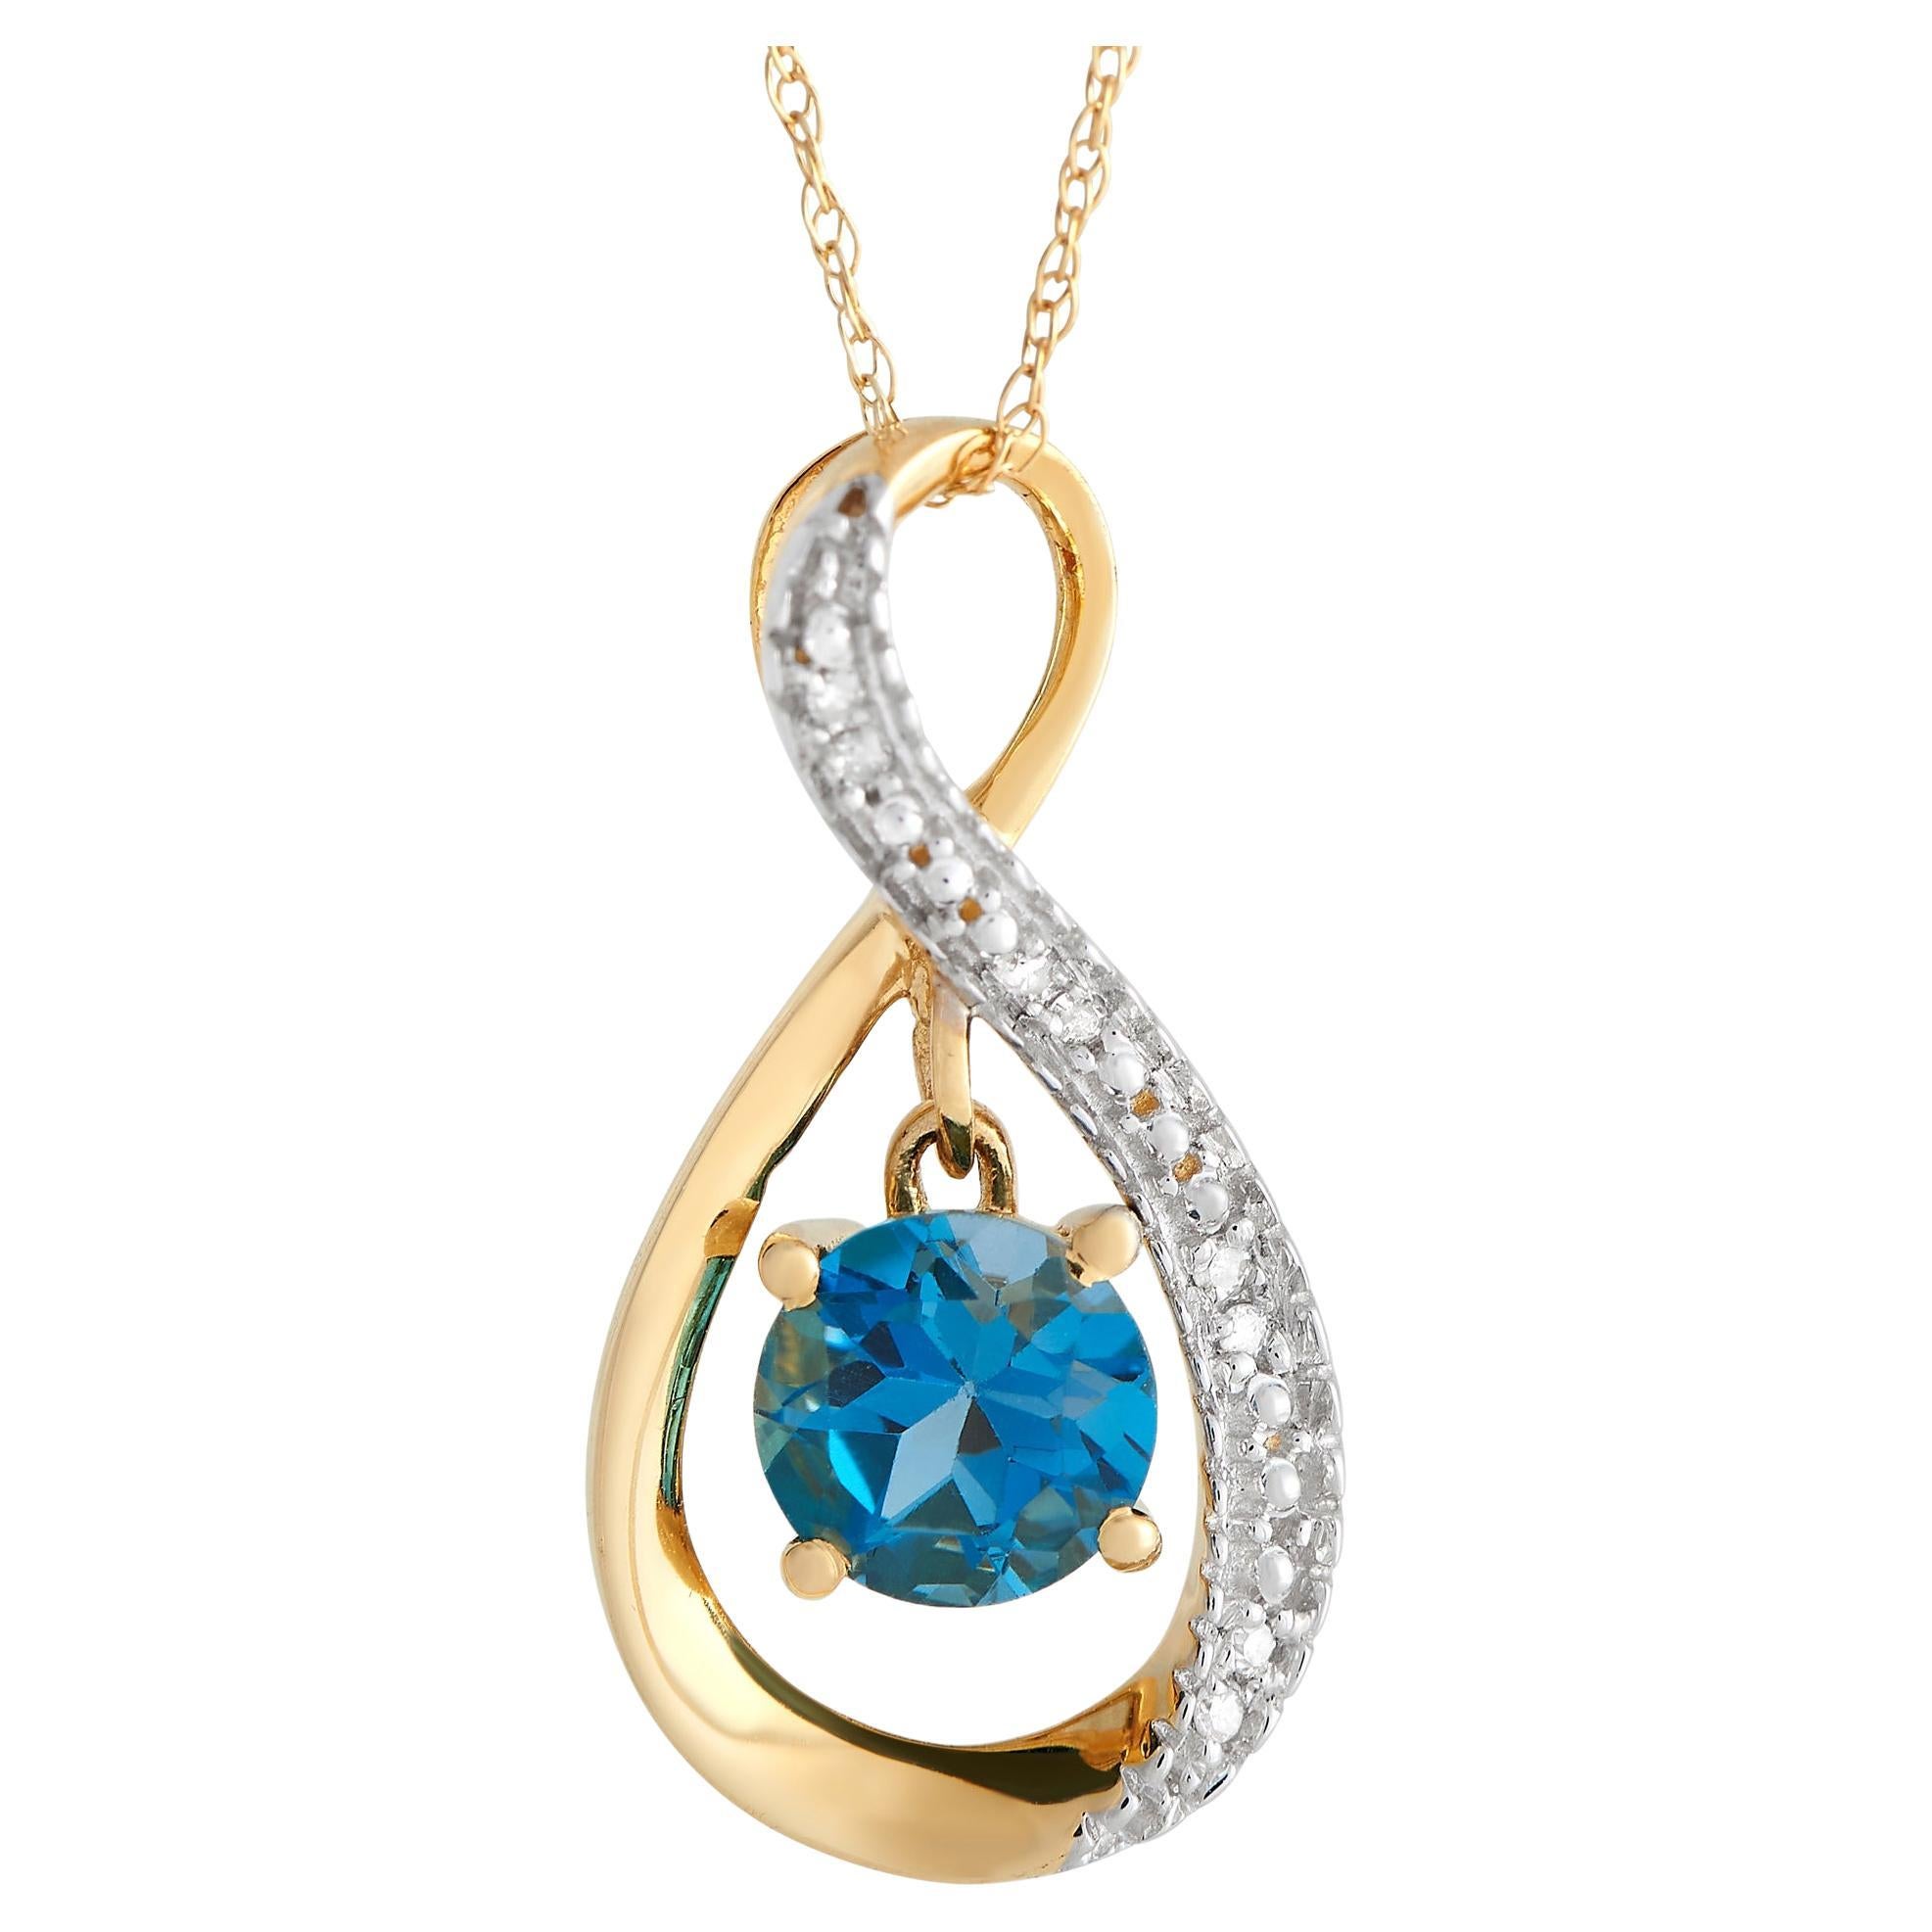 LB Exclusive 14K Yellow Gold 0.03 ct Diamond and Topaz Necklace For Sale